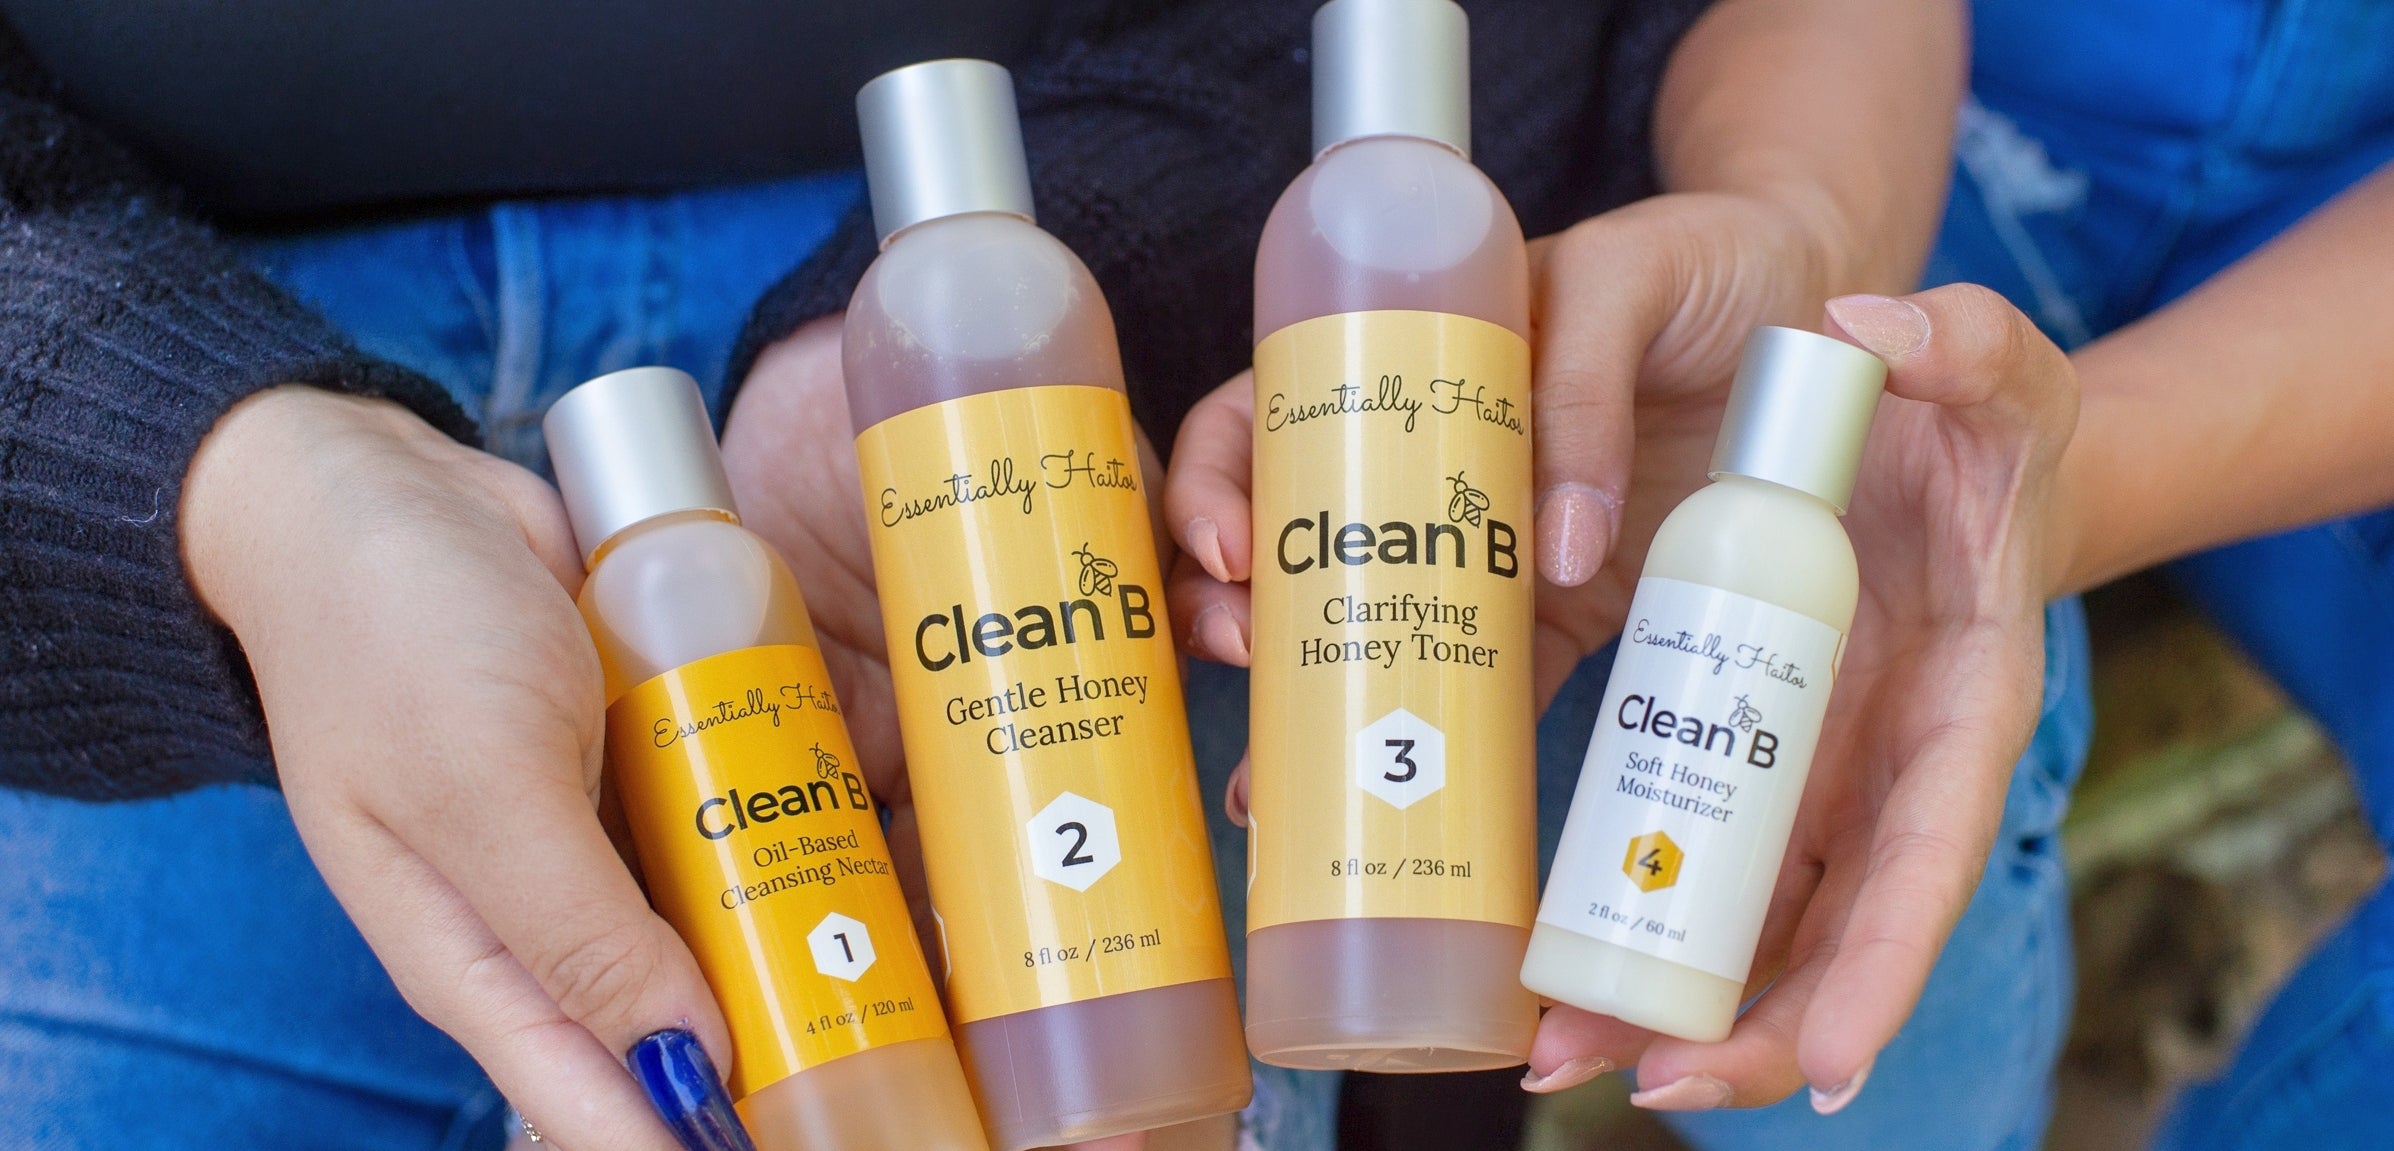 Hands holding Clean B products, steps 1 - 4